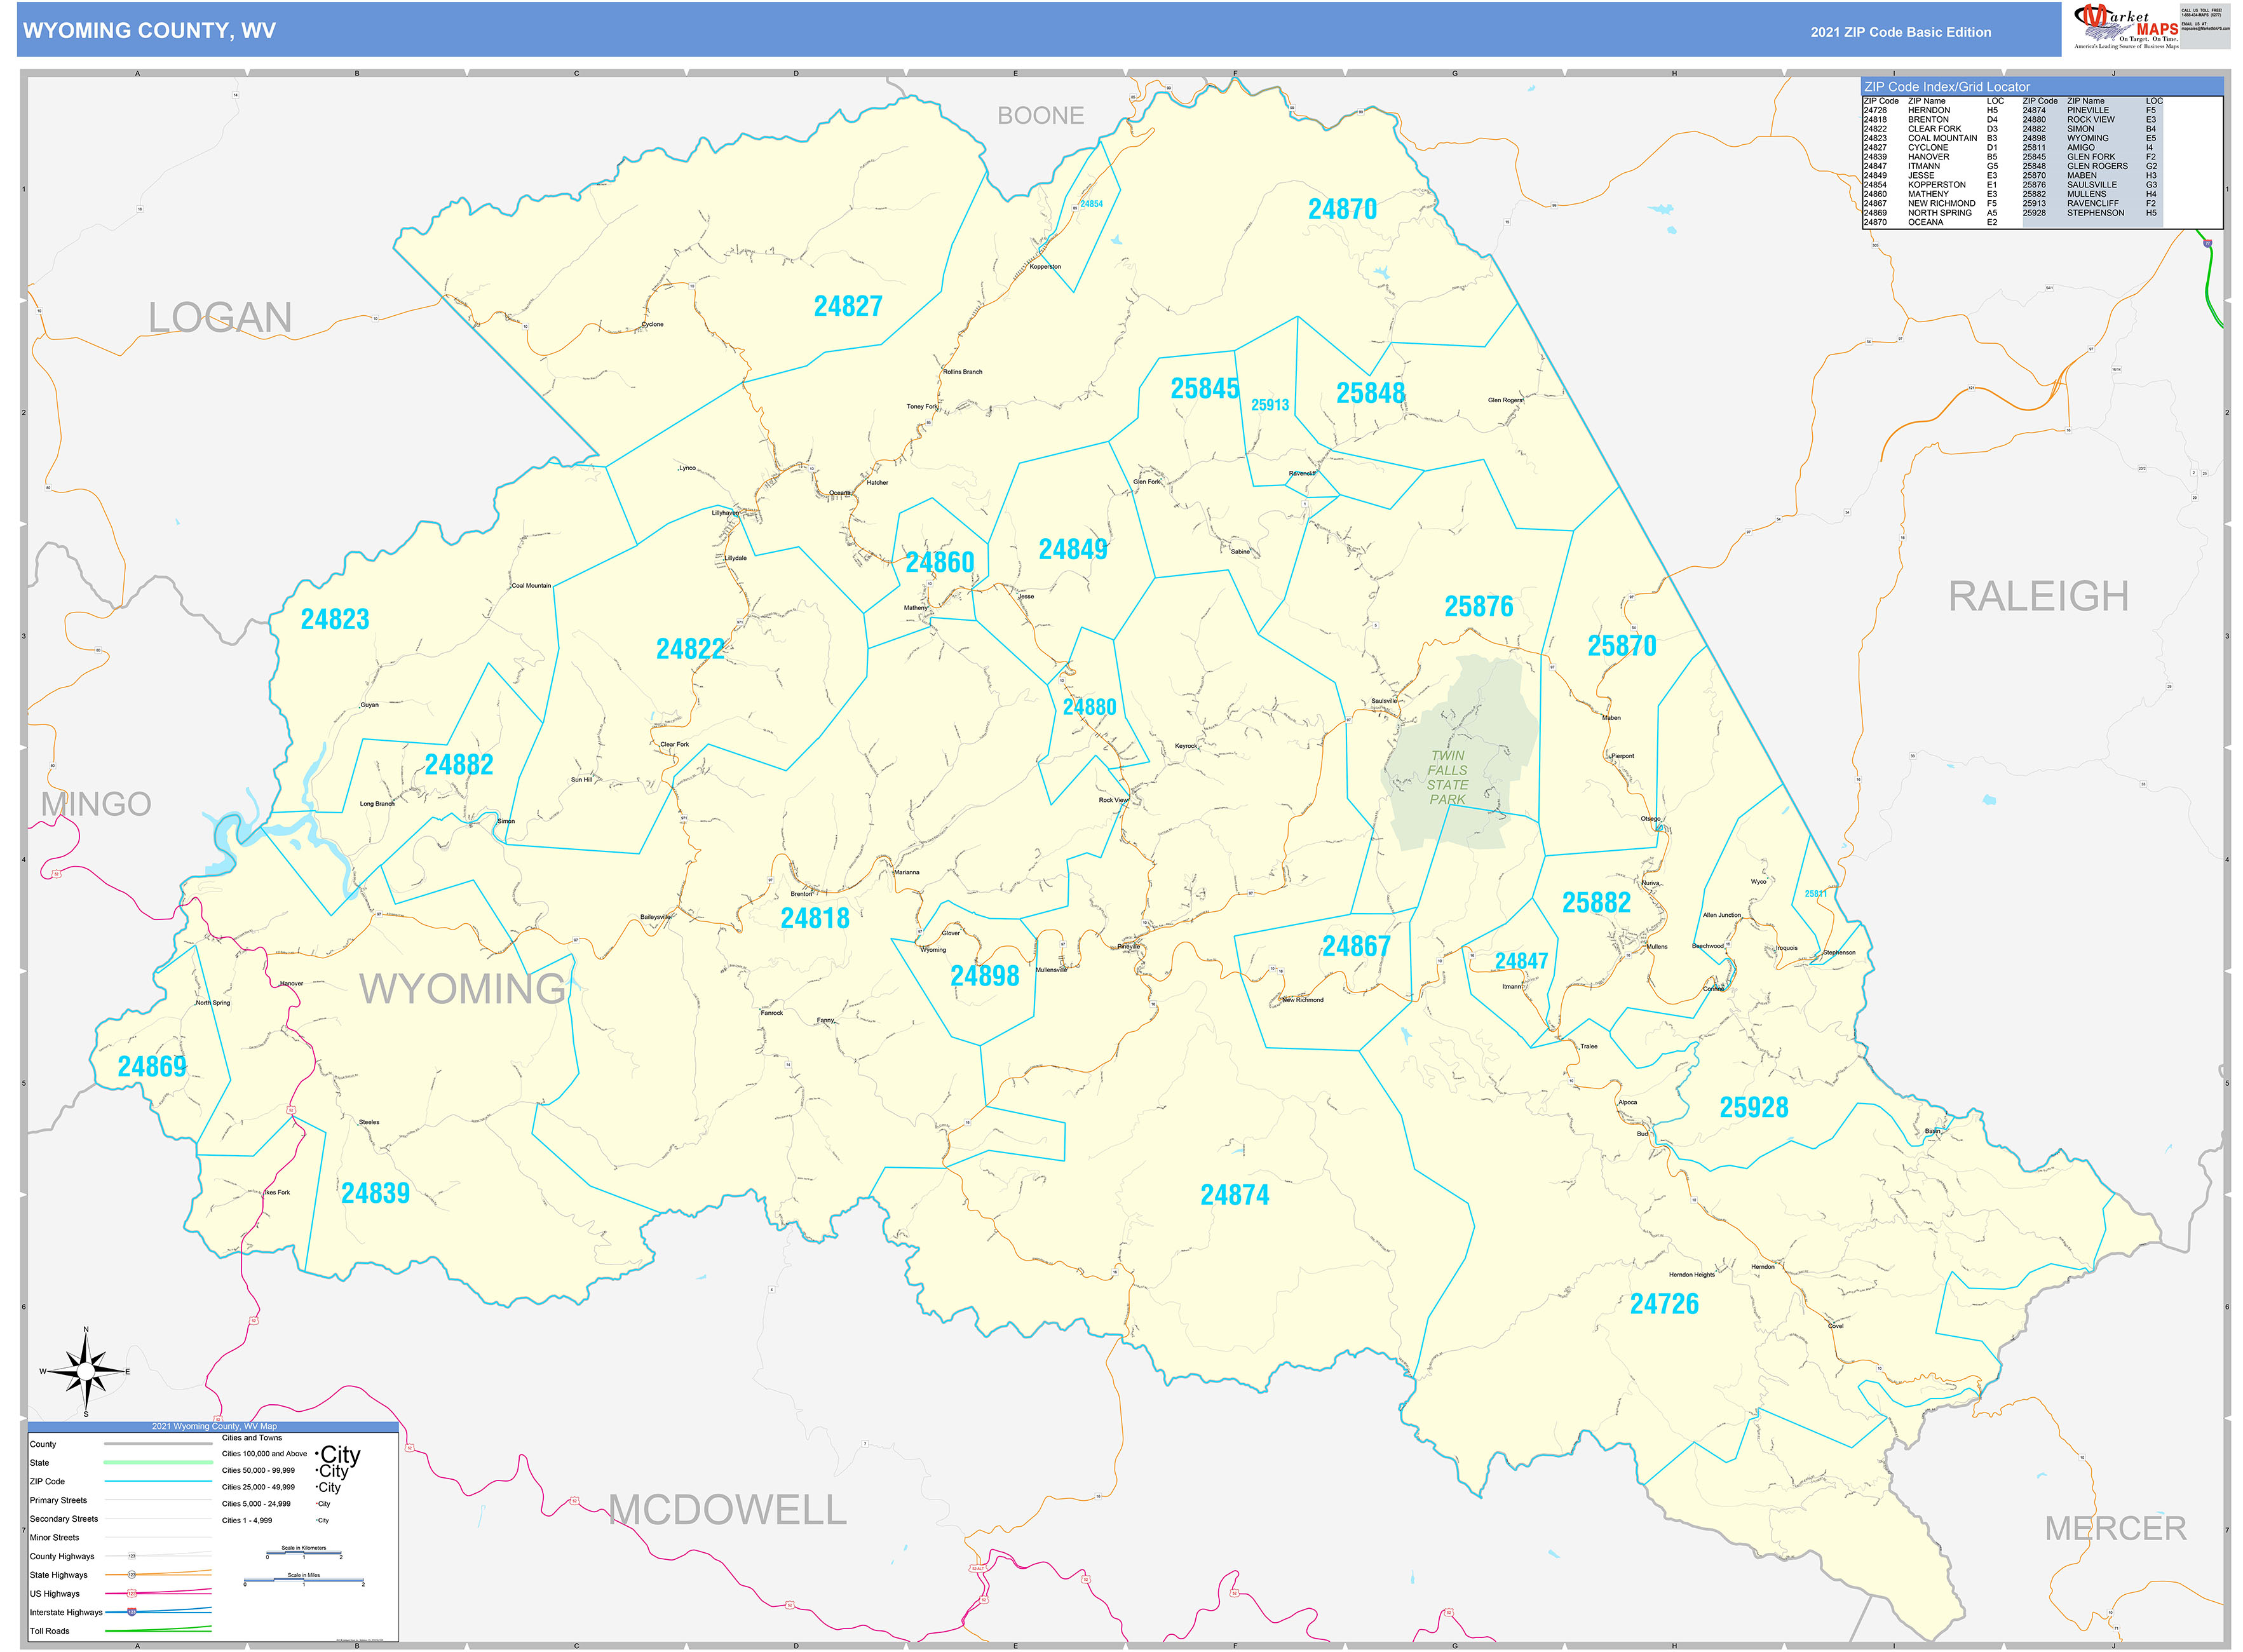 wyoming-county-wv-zip-code-wall-map-basic-style-by-marketmaps-mapsales